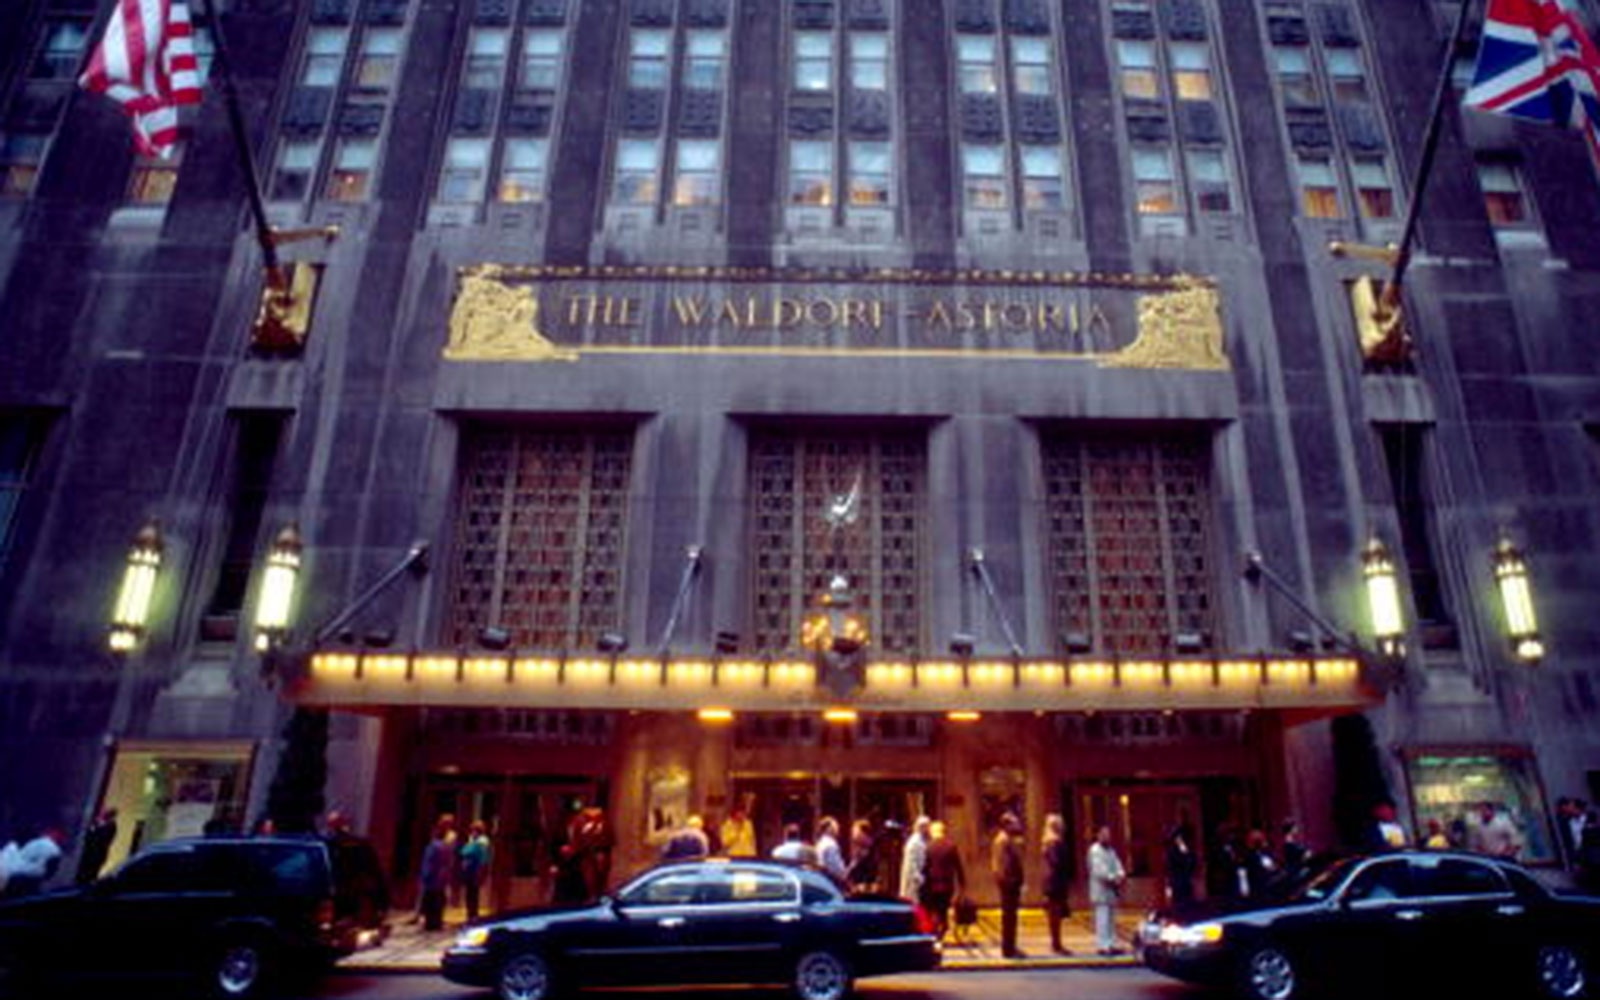 Why Obama Will be the First President in Decades Not to Stay at Waldorf Astoria